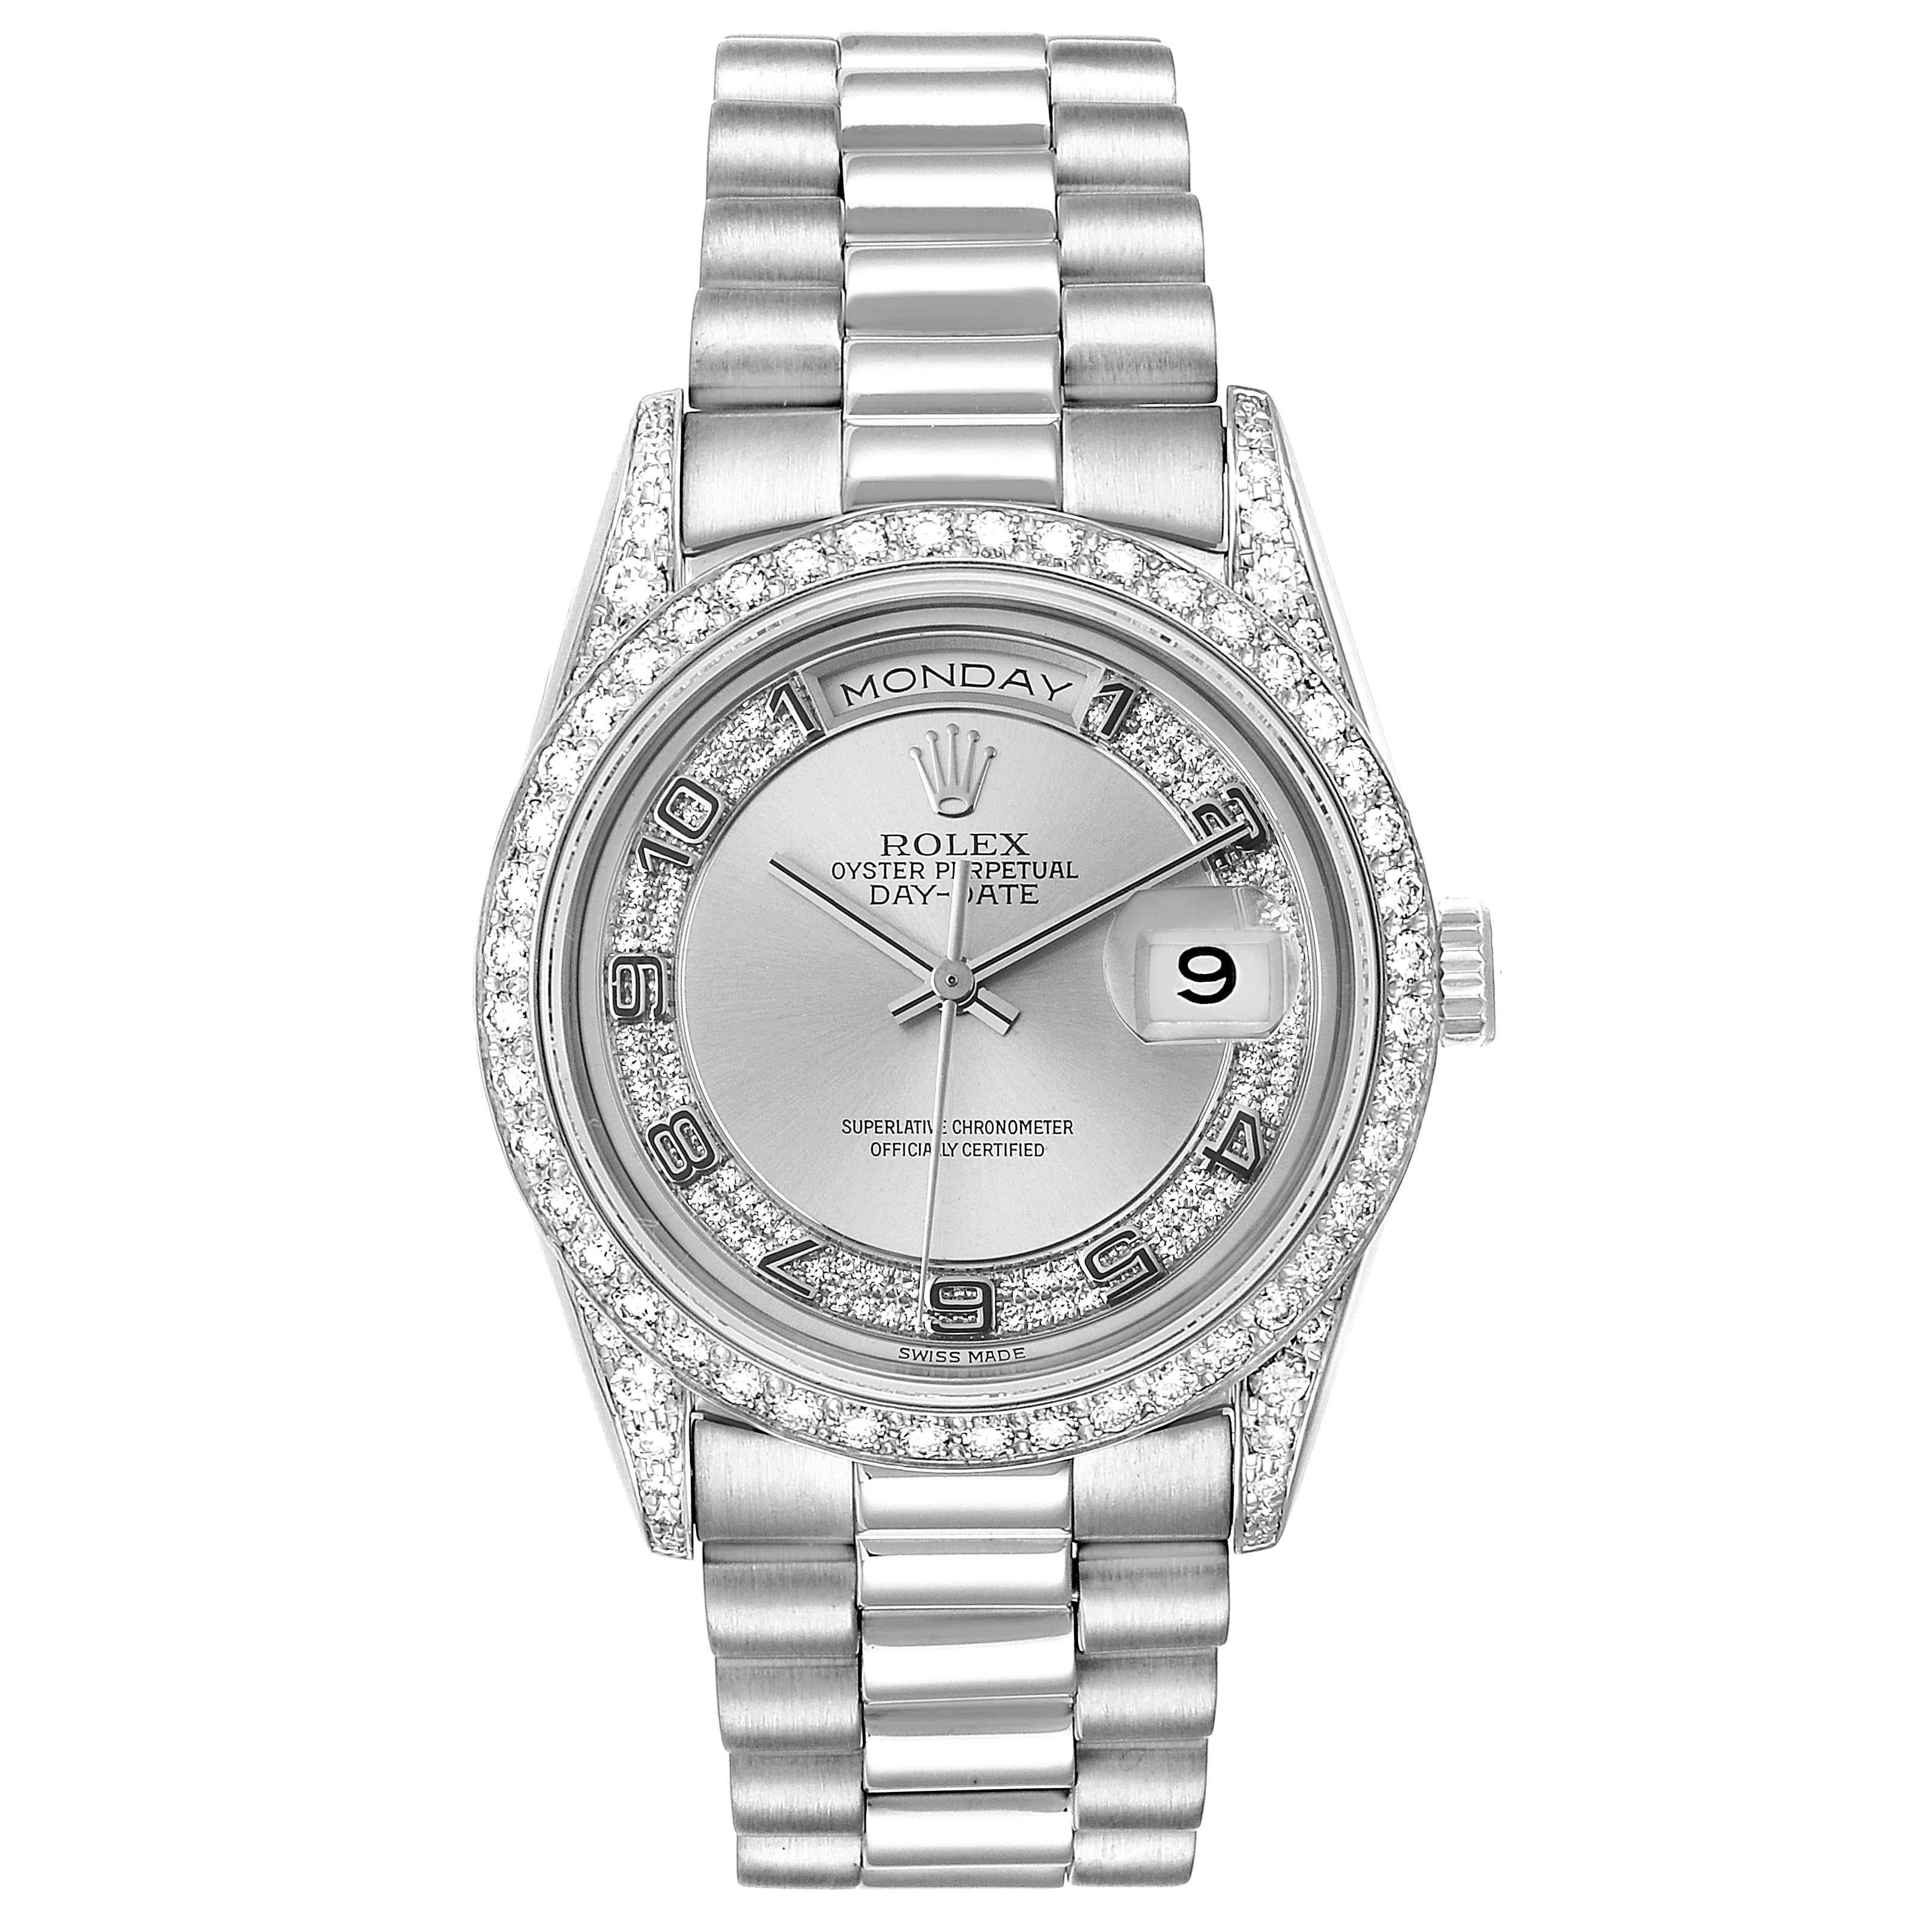 Rolex President Day-Date White Gold Myriad Diamond Mens Watch 18389. Officially certified chronometer self-winding movement. double quick set function. 18k white gold oyster case 36.0 mm in diameter. Rolex logo on a crown. Rolex factory diamond